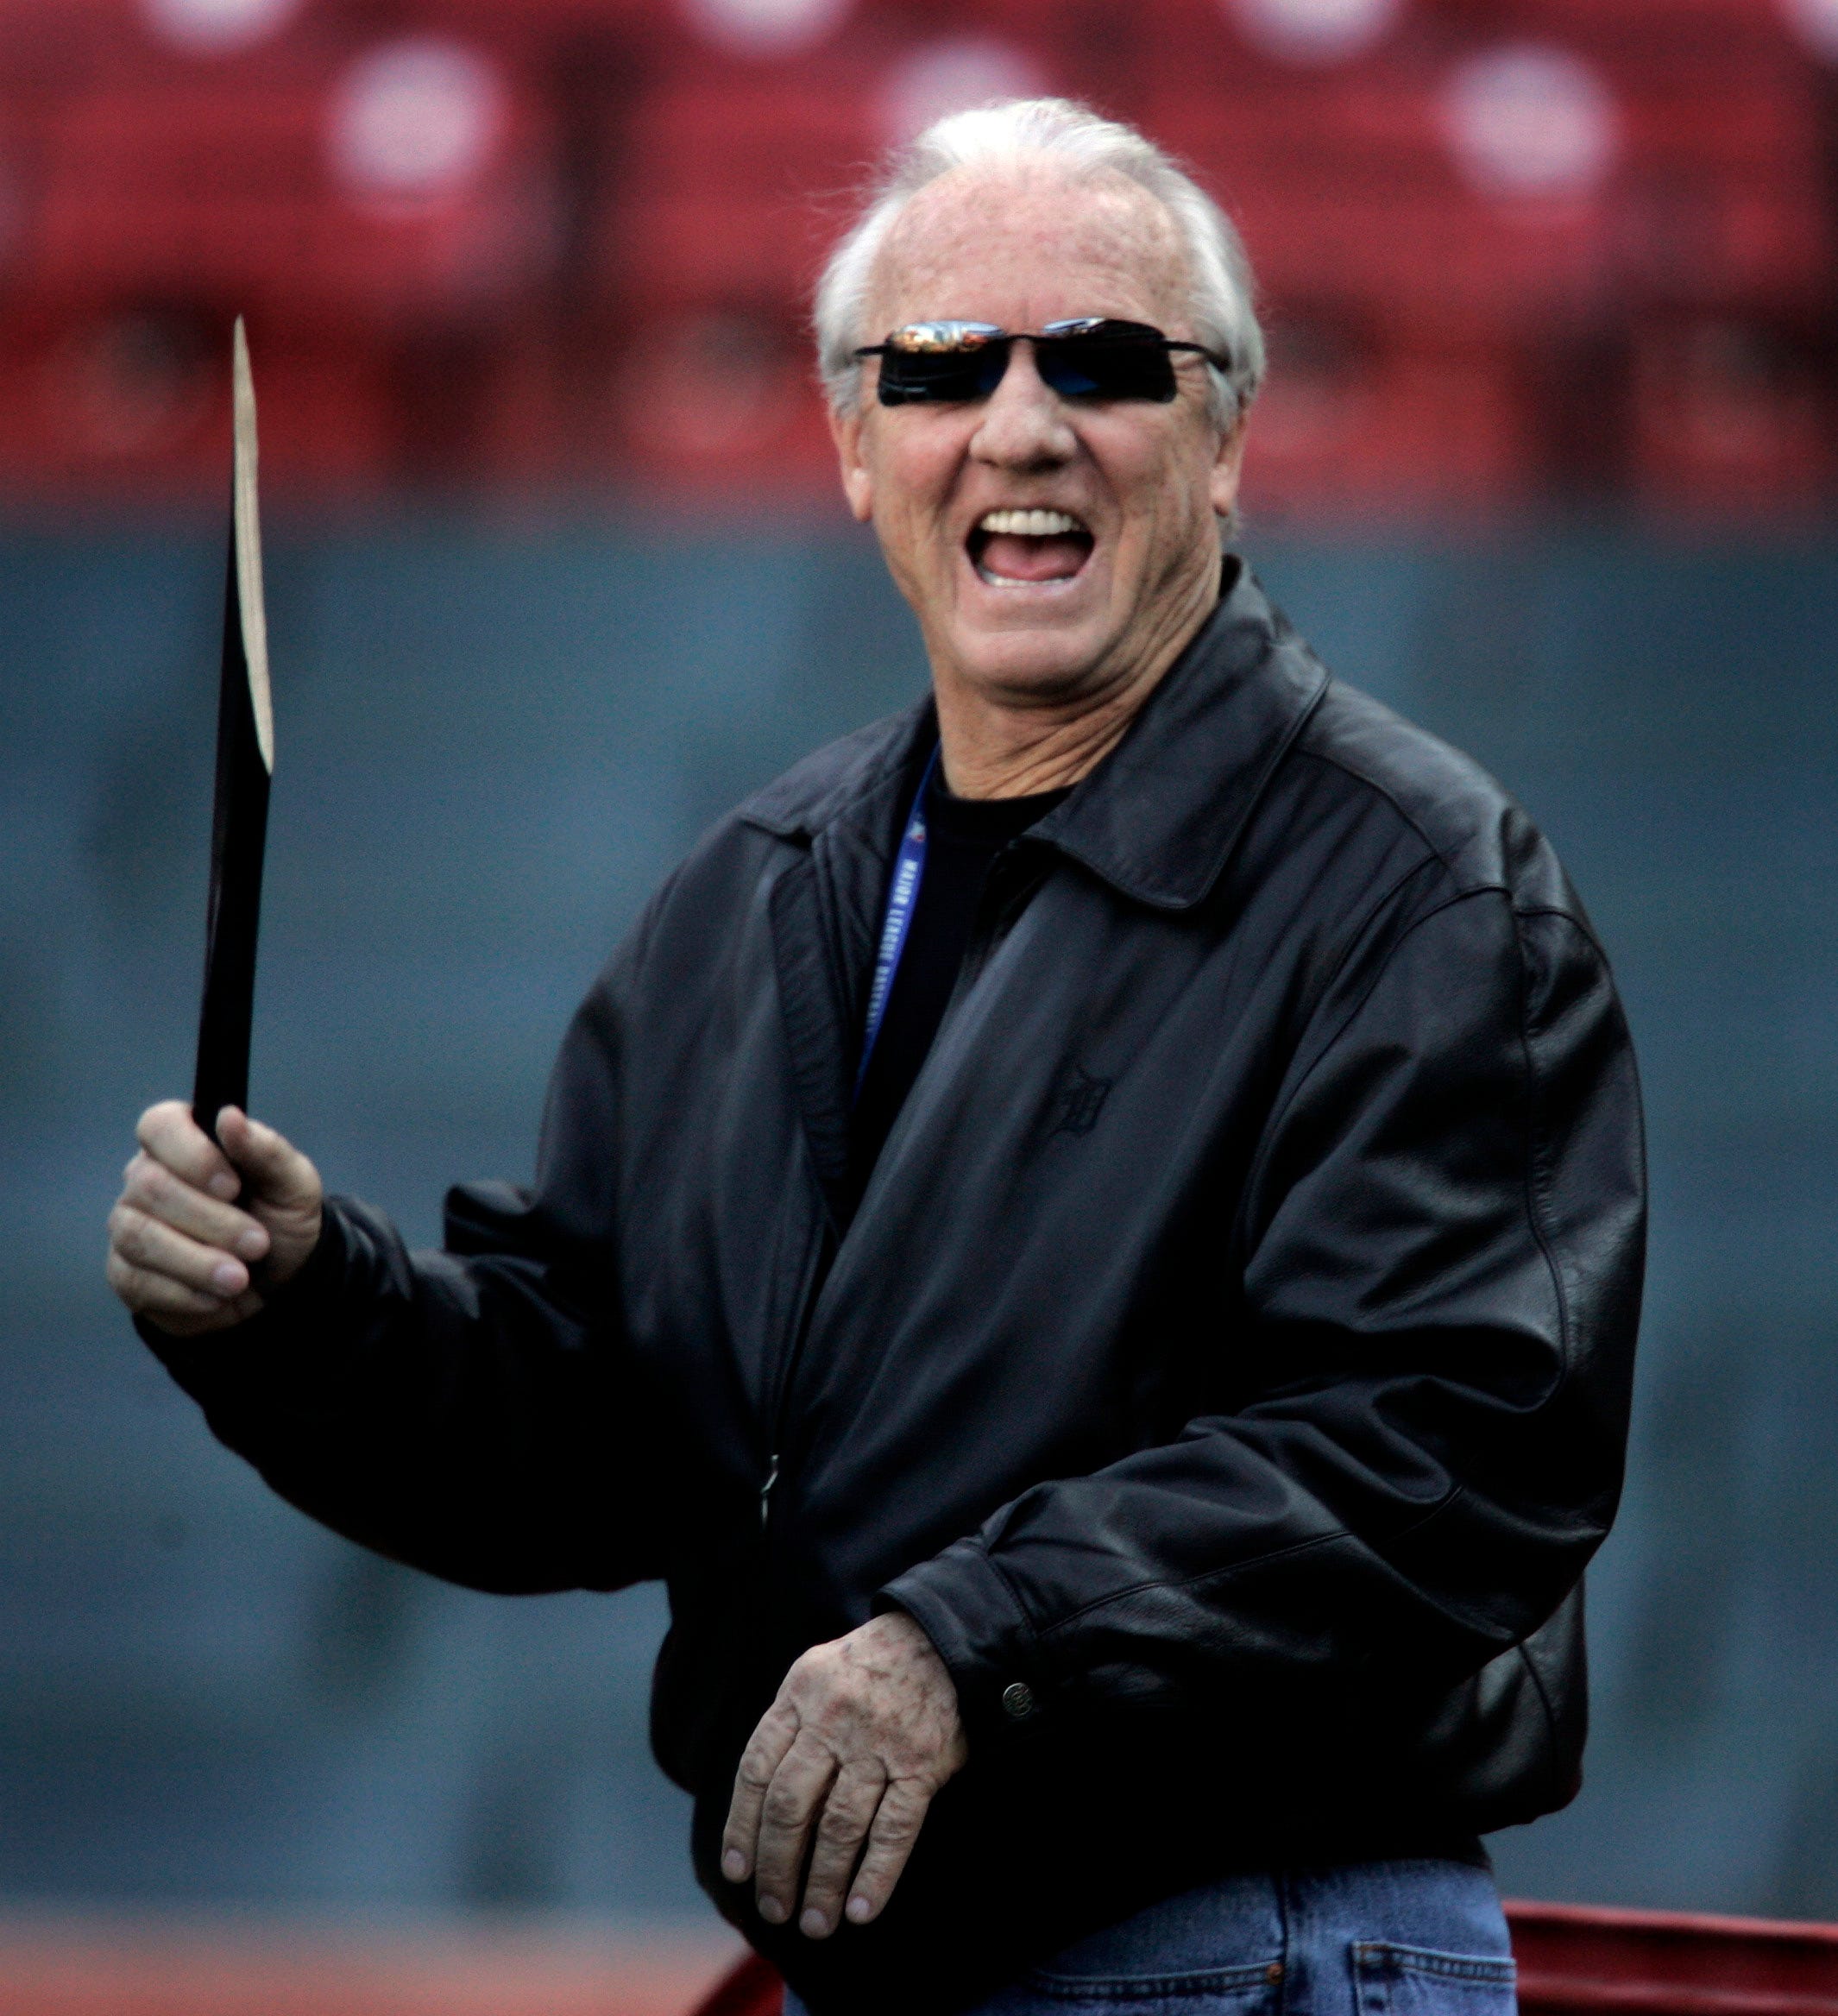 Tigers Al Kaline laughs out loud as he plays with a broken bat, Monday Oct. 23, 2006, during World Series workouts at Busch Stadium in St. Louis.